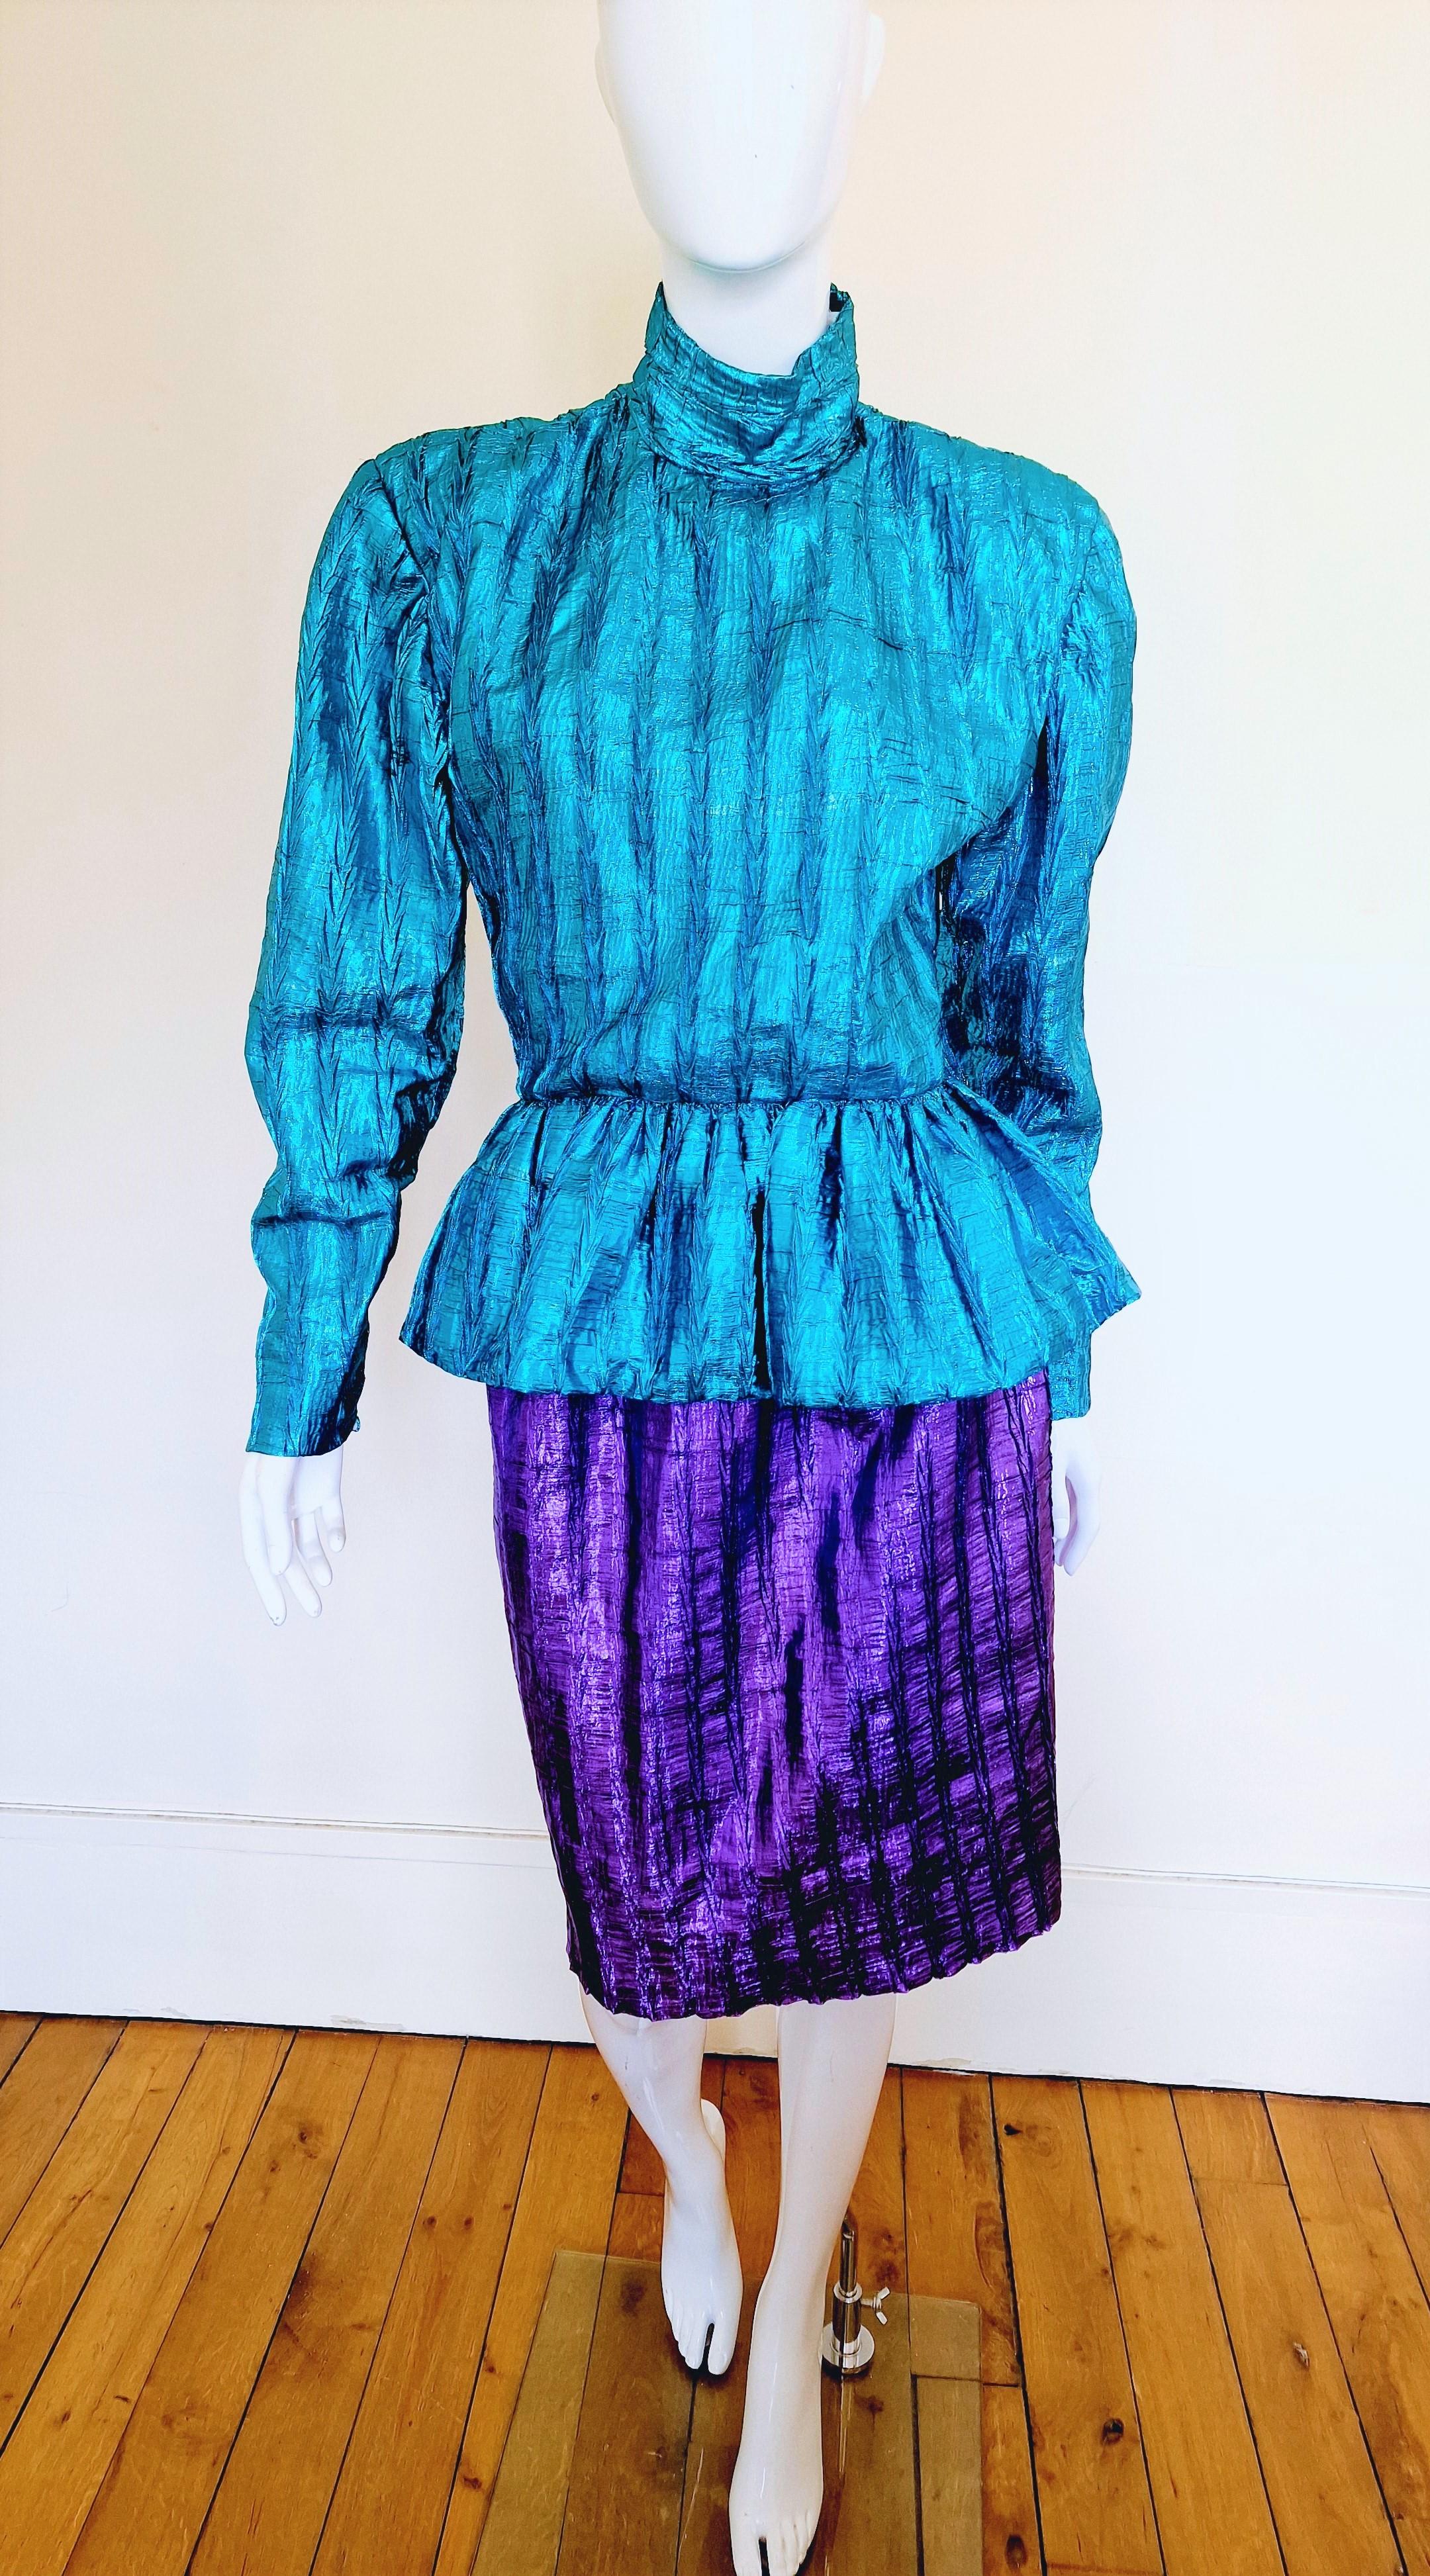 Christian Dior set from the 70s!
Top + skirt!
With shoulder pads.
Shiny and strong colors!

VERY GOOD condition! The top has discolorations, please chech the last photos! Still wonderful!

SIZE
Fits from small to smaller medium.
No size